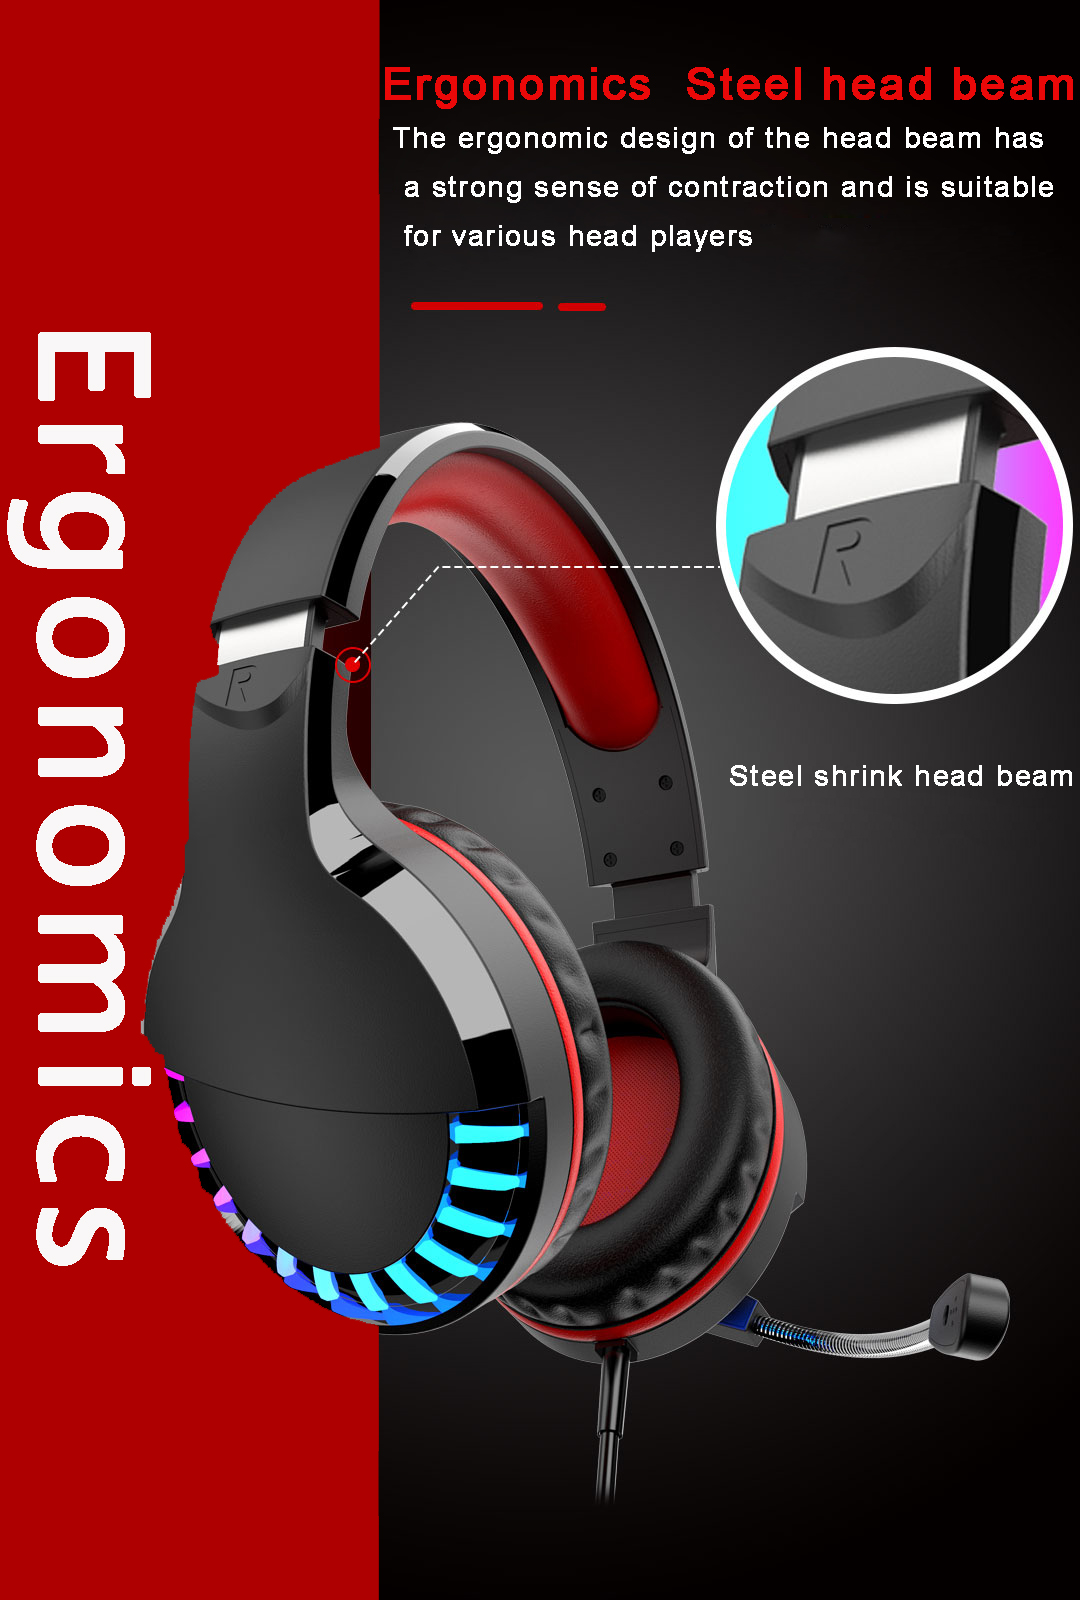 M18-Gaming-Headphones-Luminous-Colorful-Headset-35mm-Stereo-Earphone-with-Microphone-For-XBox-PS4-Ga-1722974-7